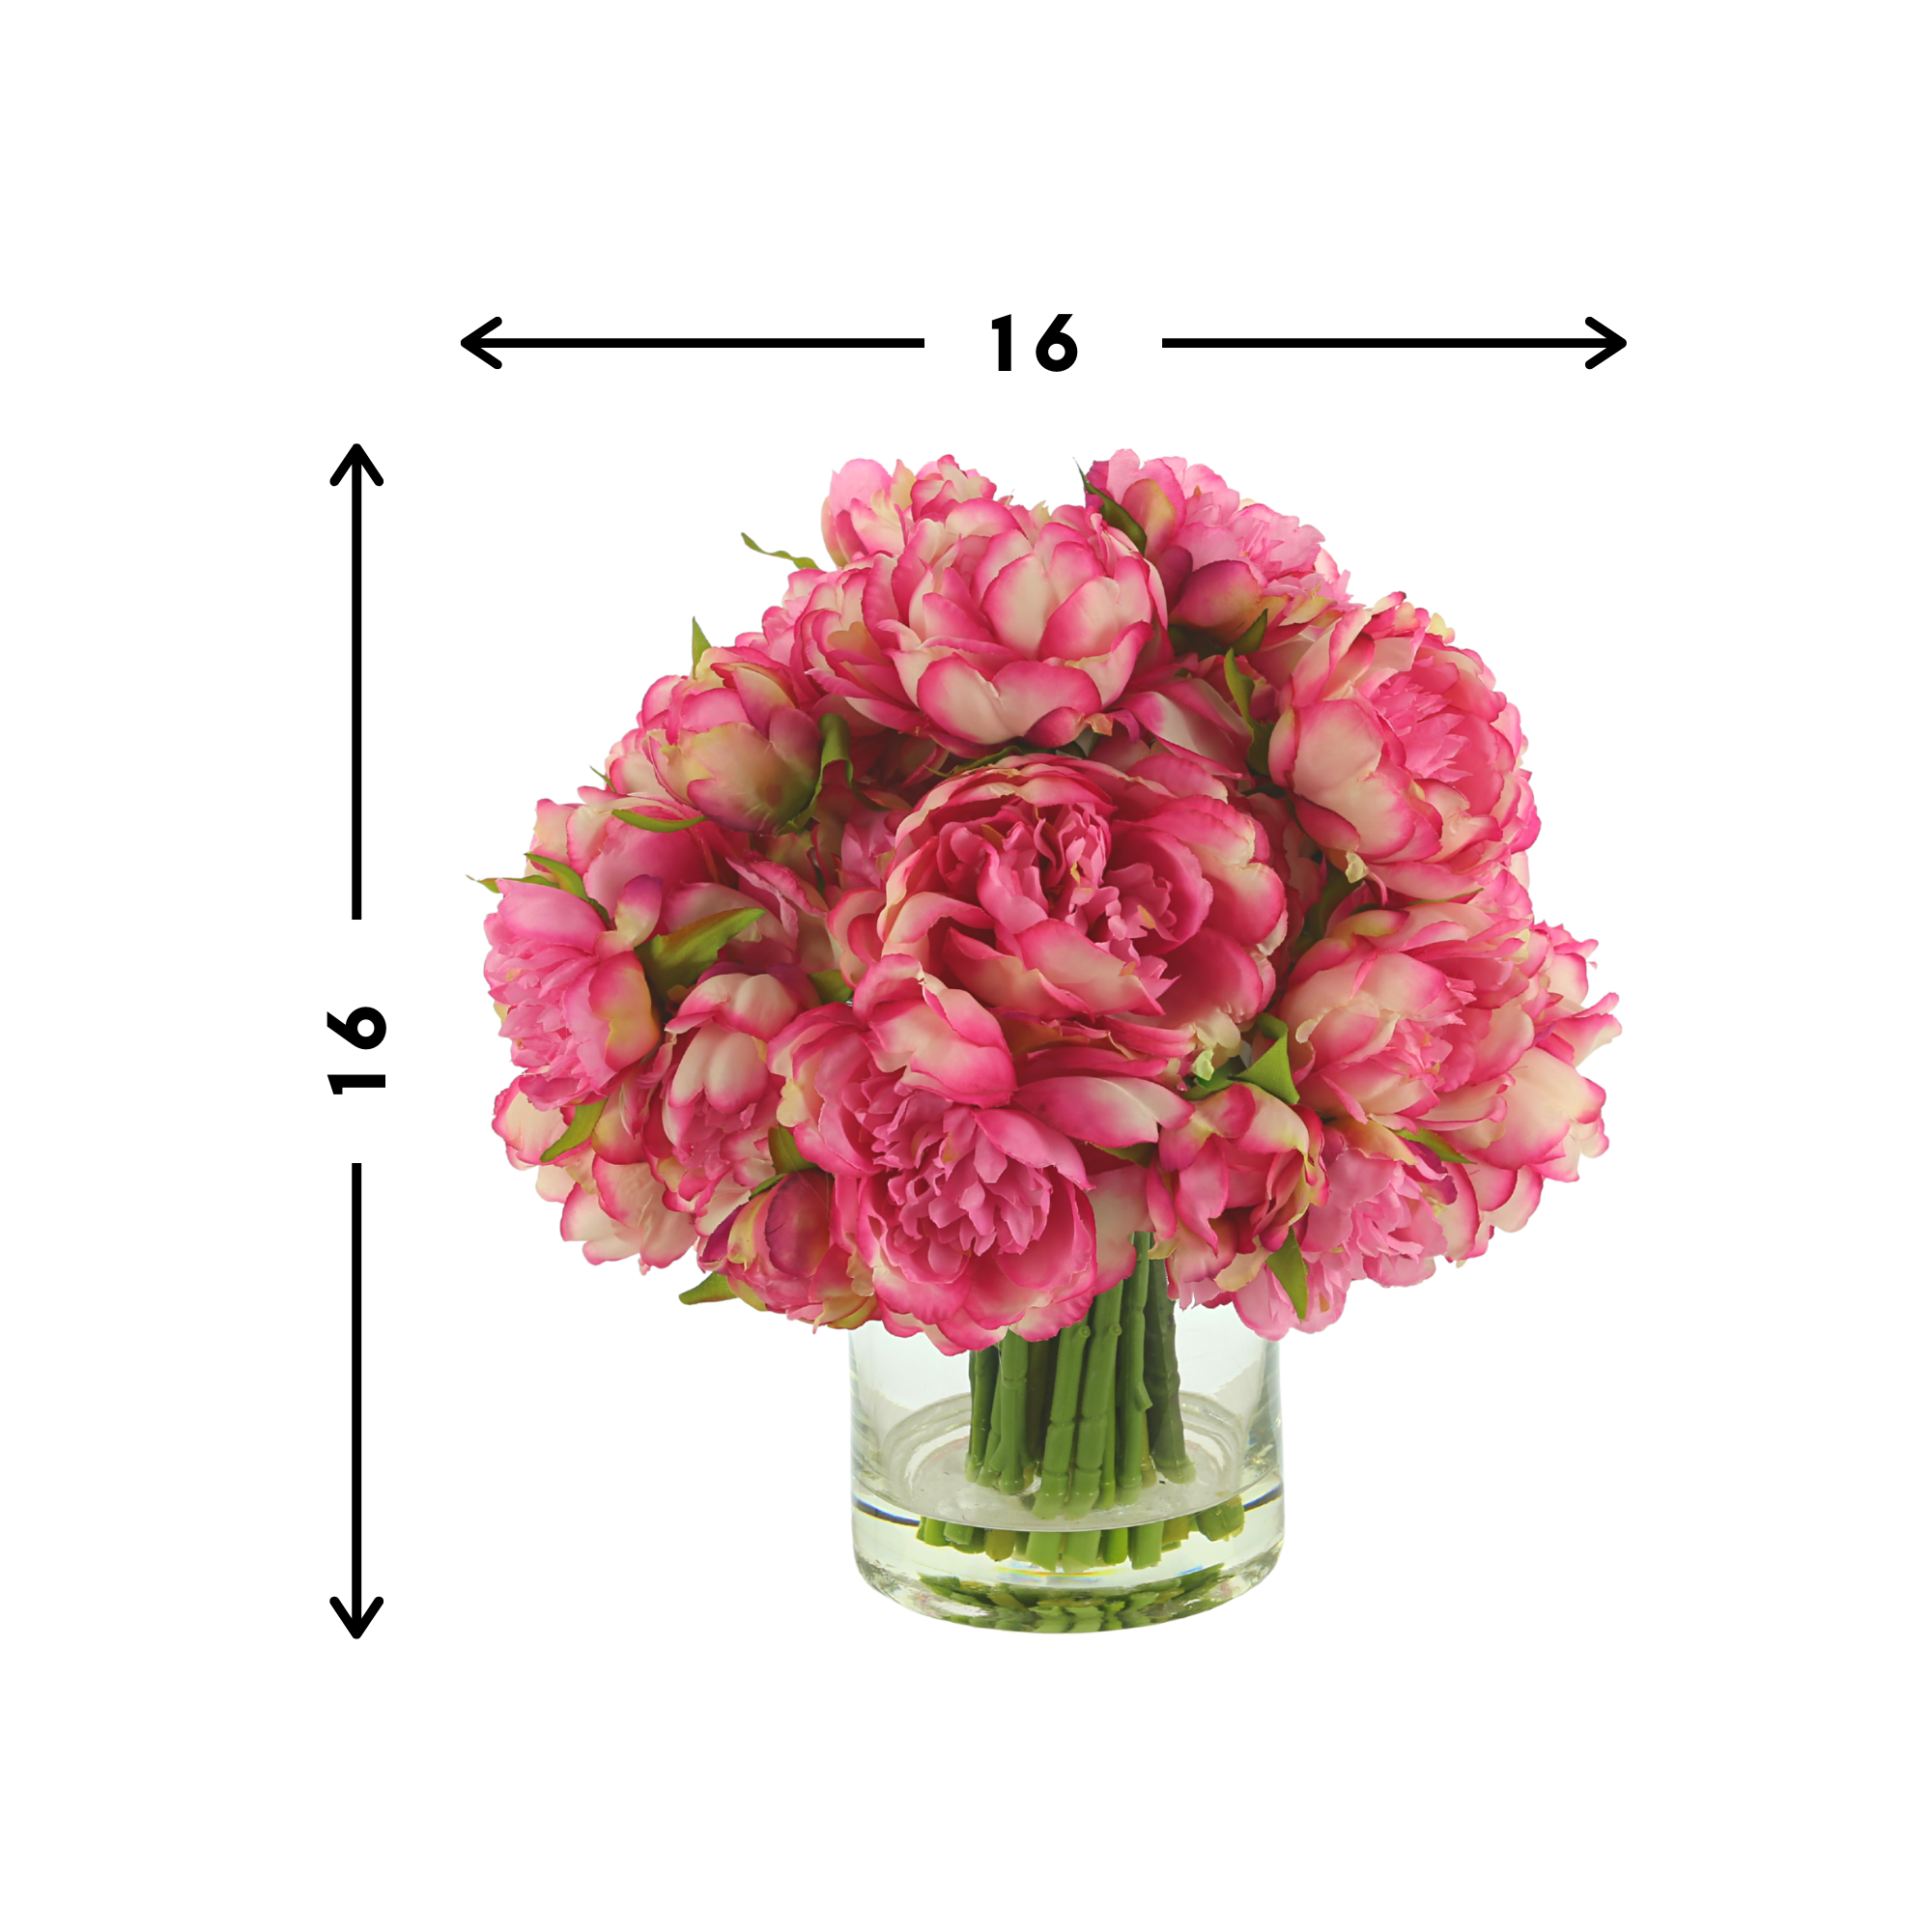 Peonies Centerpiece in a Clear Glass Vase